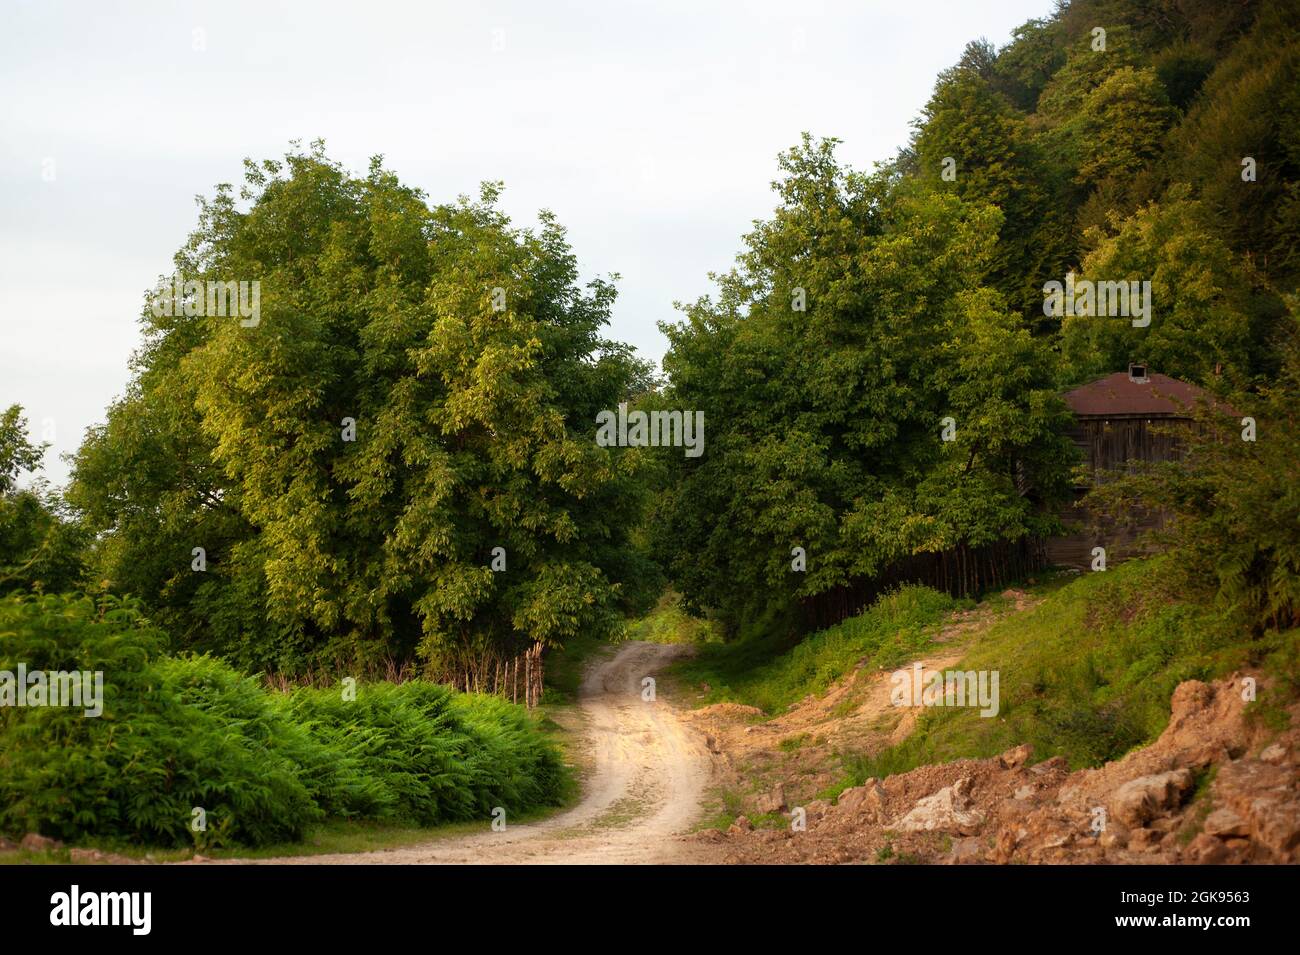 the view of countryside dirt road with alder trees in gilan province, Iran Stock Photo